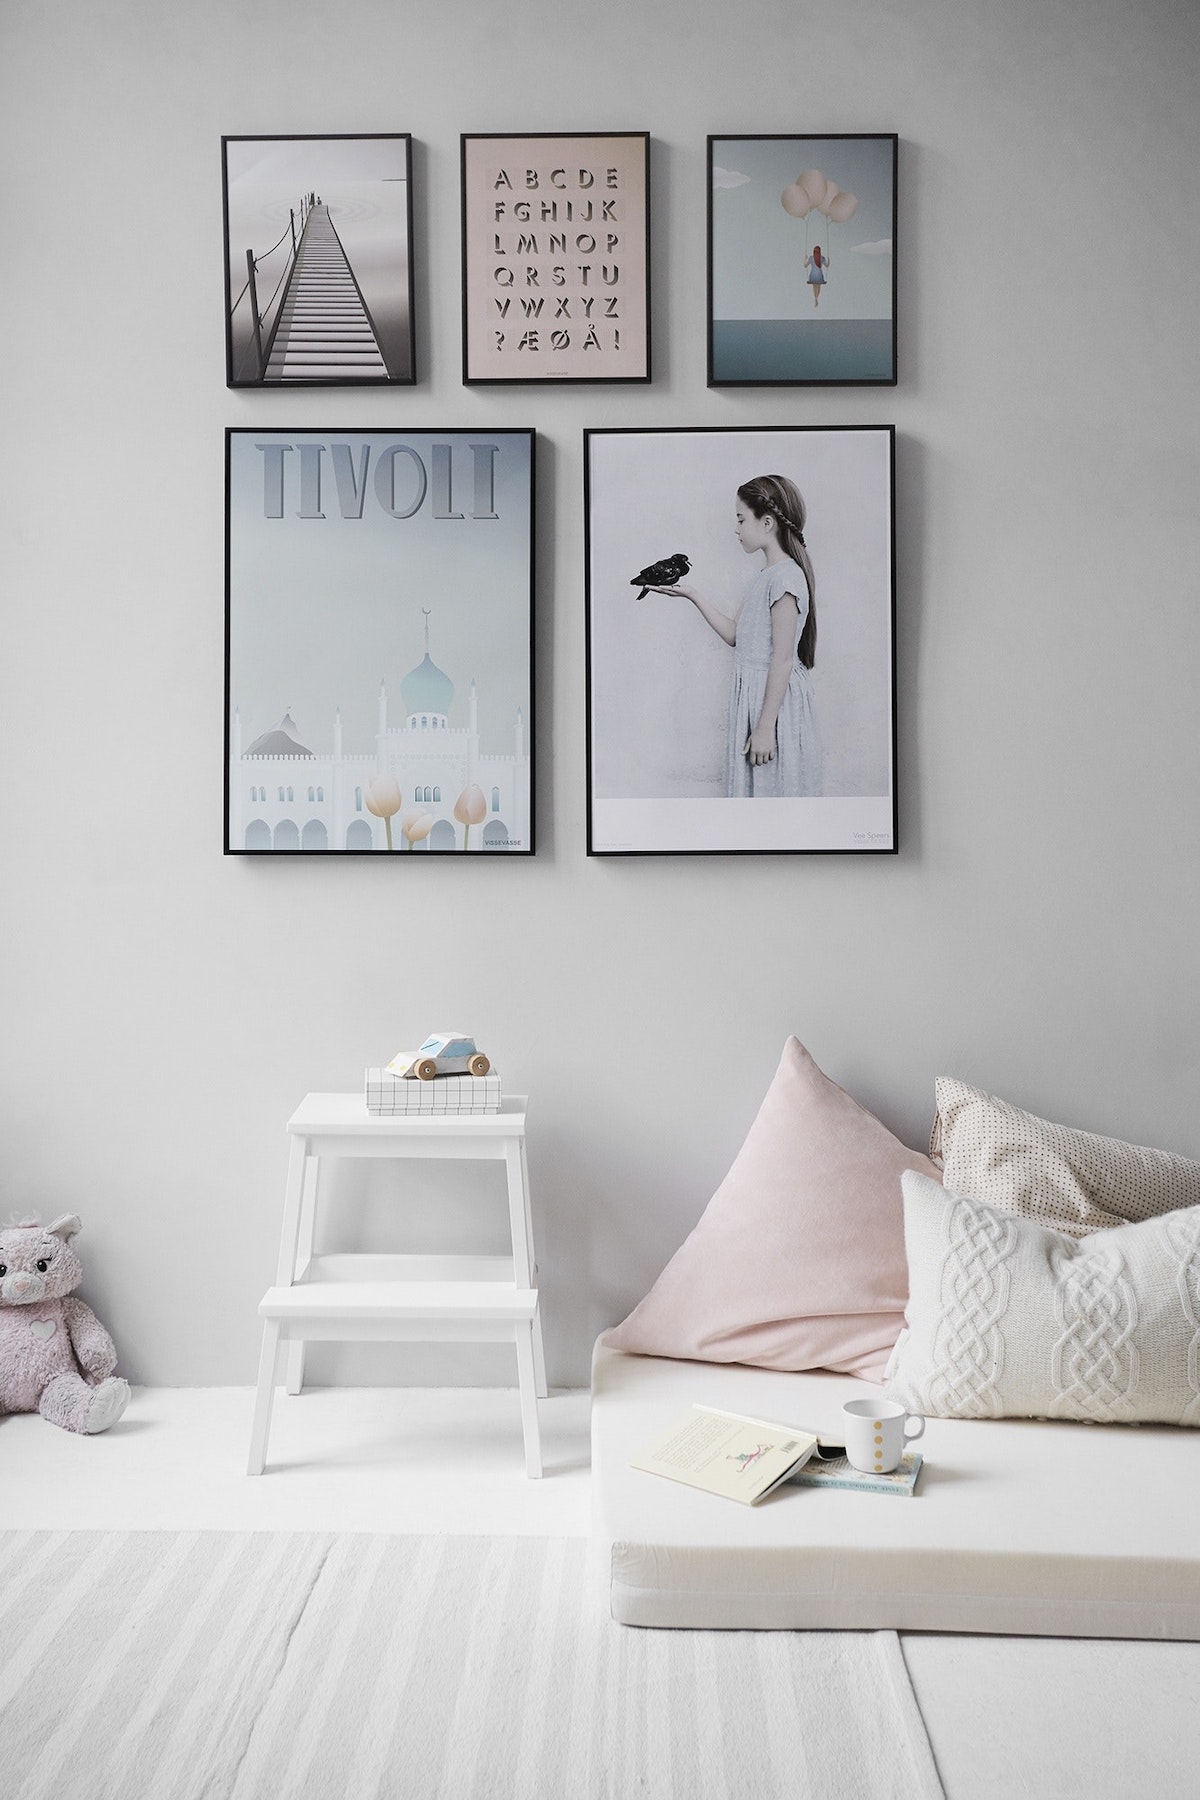 How To Make Your Home Decor More Personal